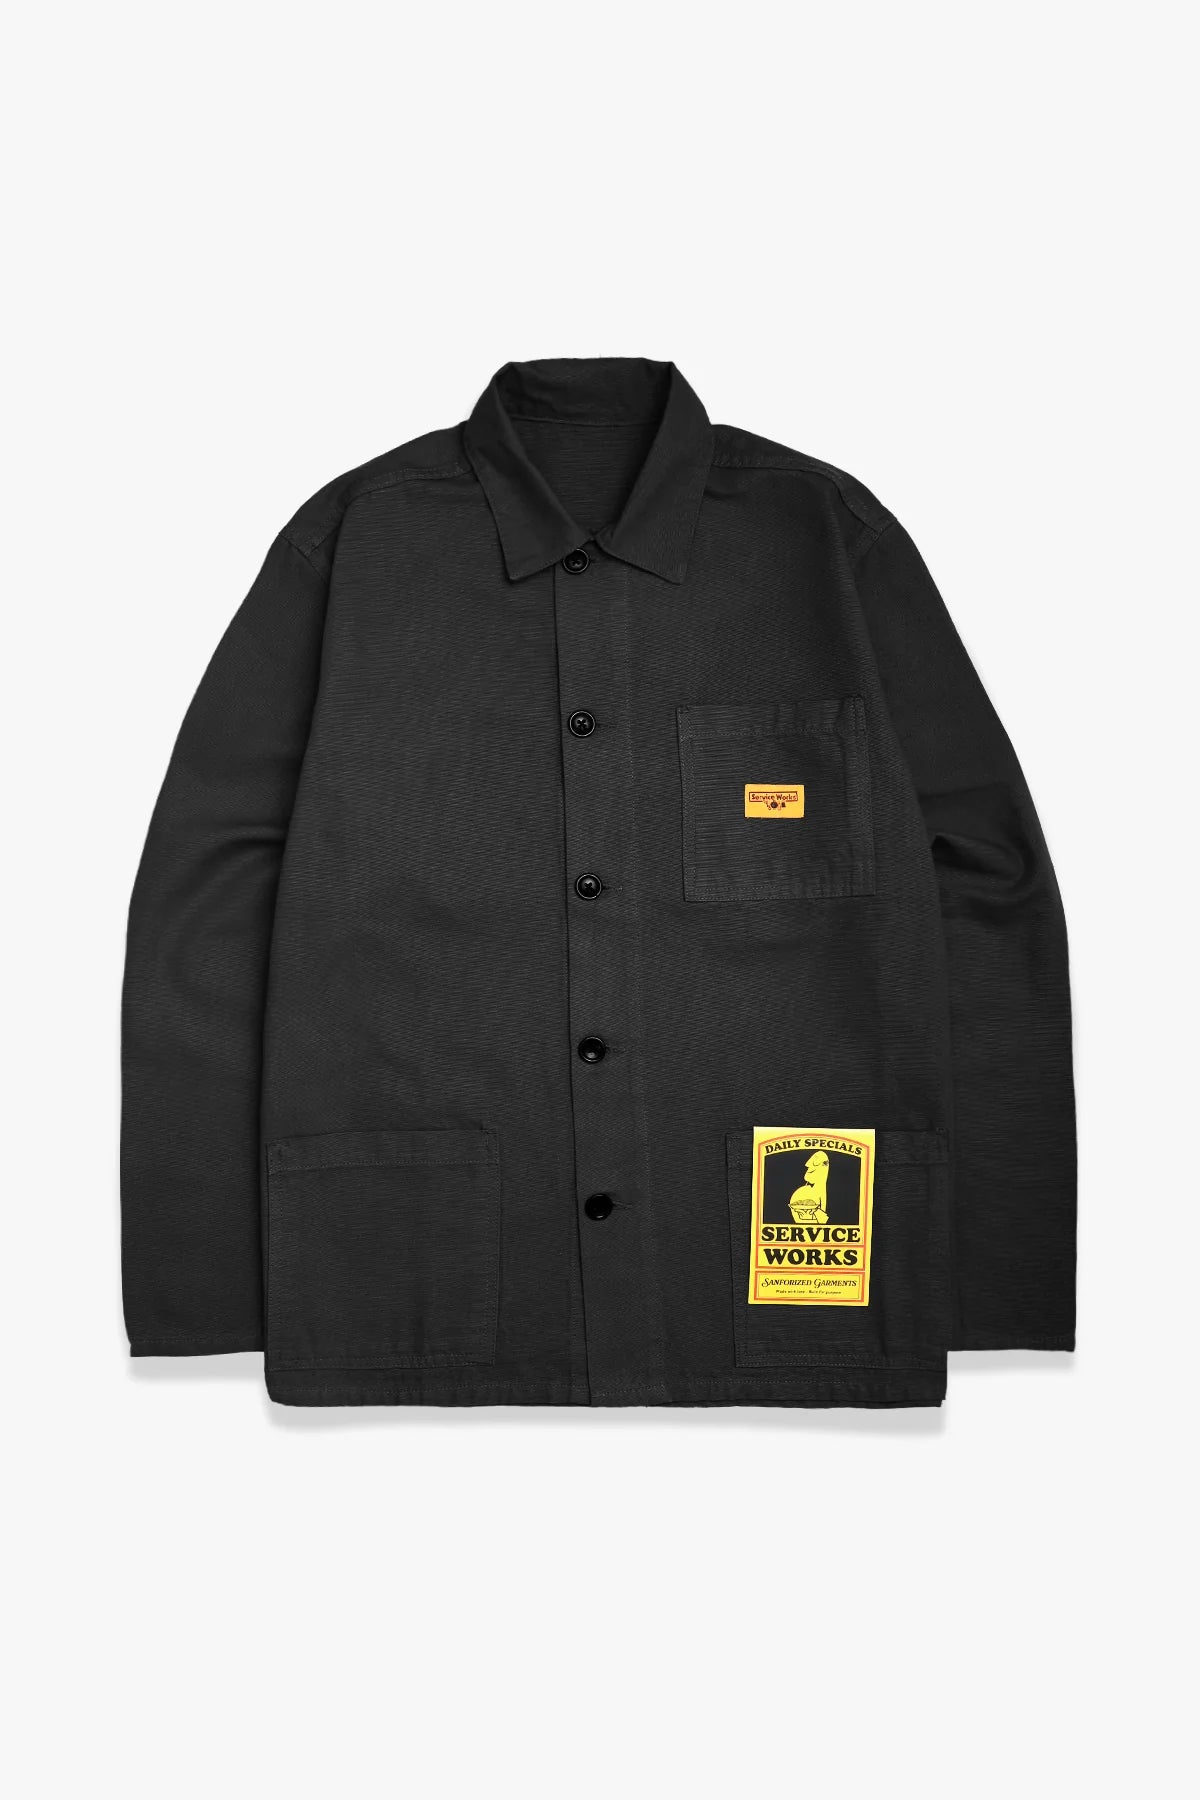 service-works-canvas-coverall-jacket-black